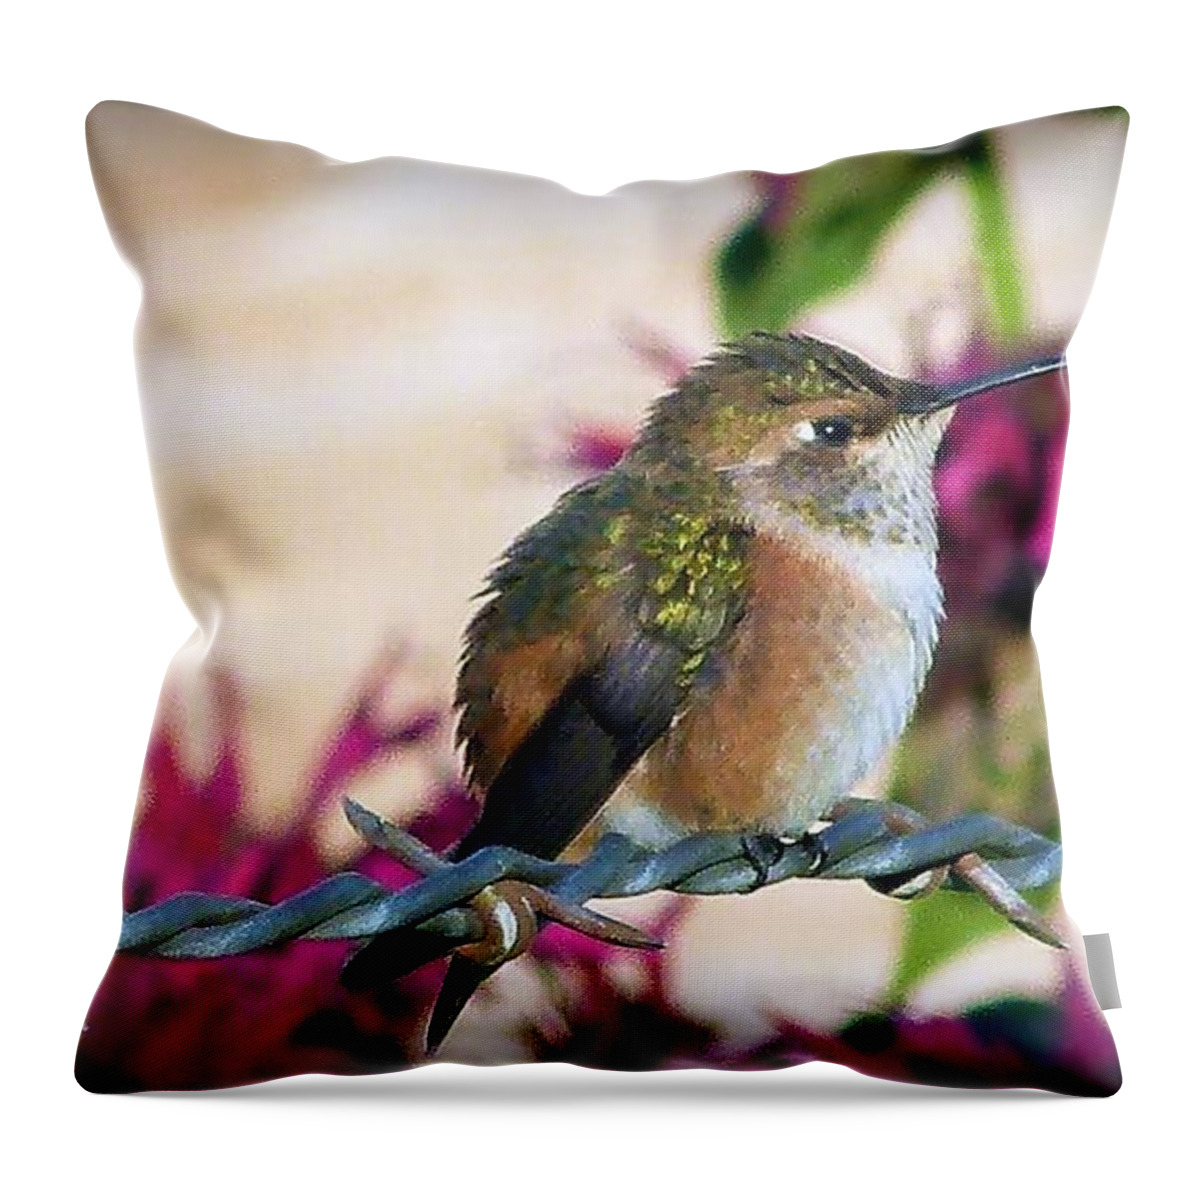 Animals Throw Pillow featuring the photograph Barbs And Bills by Julia Hassett